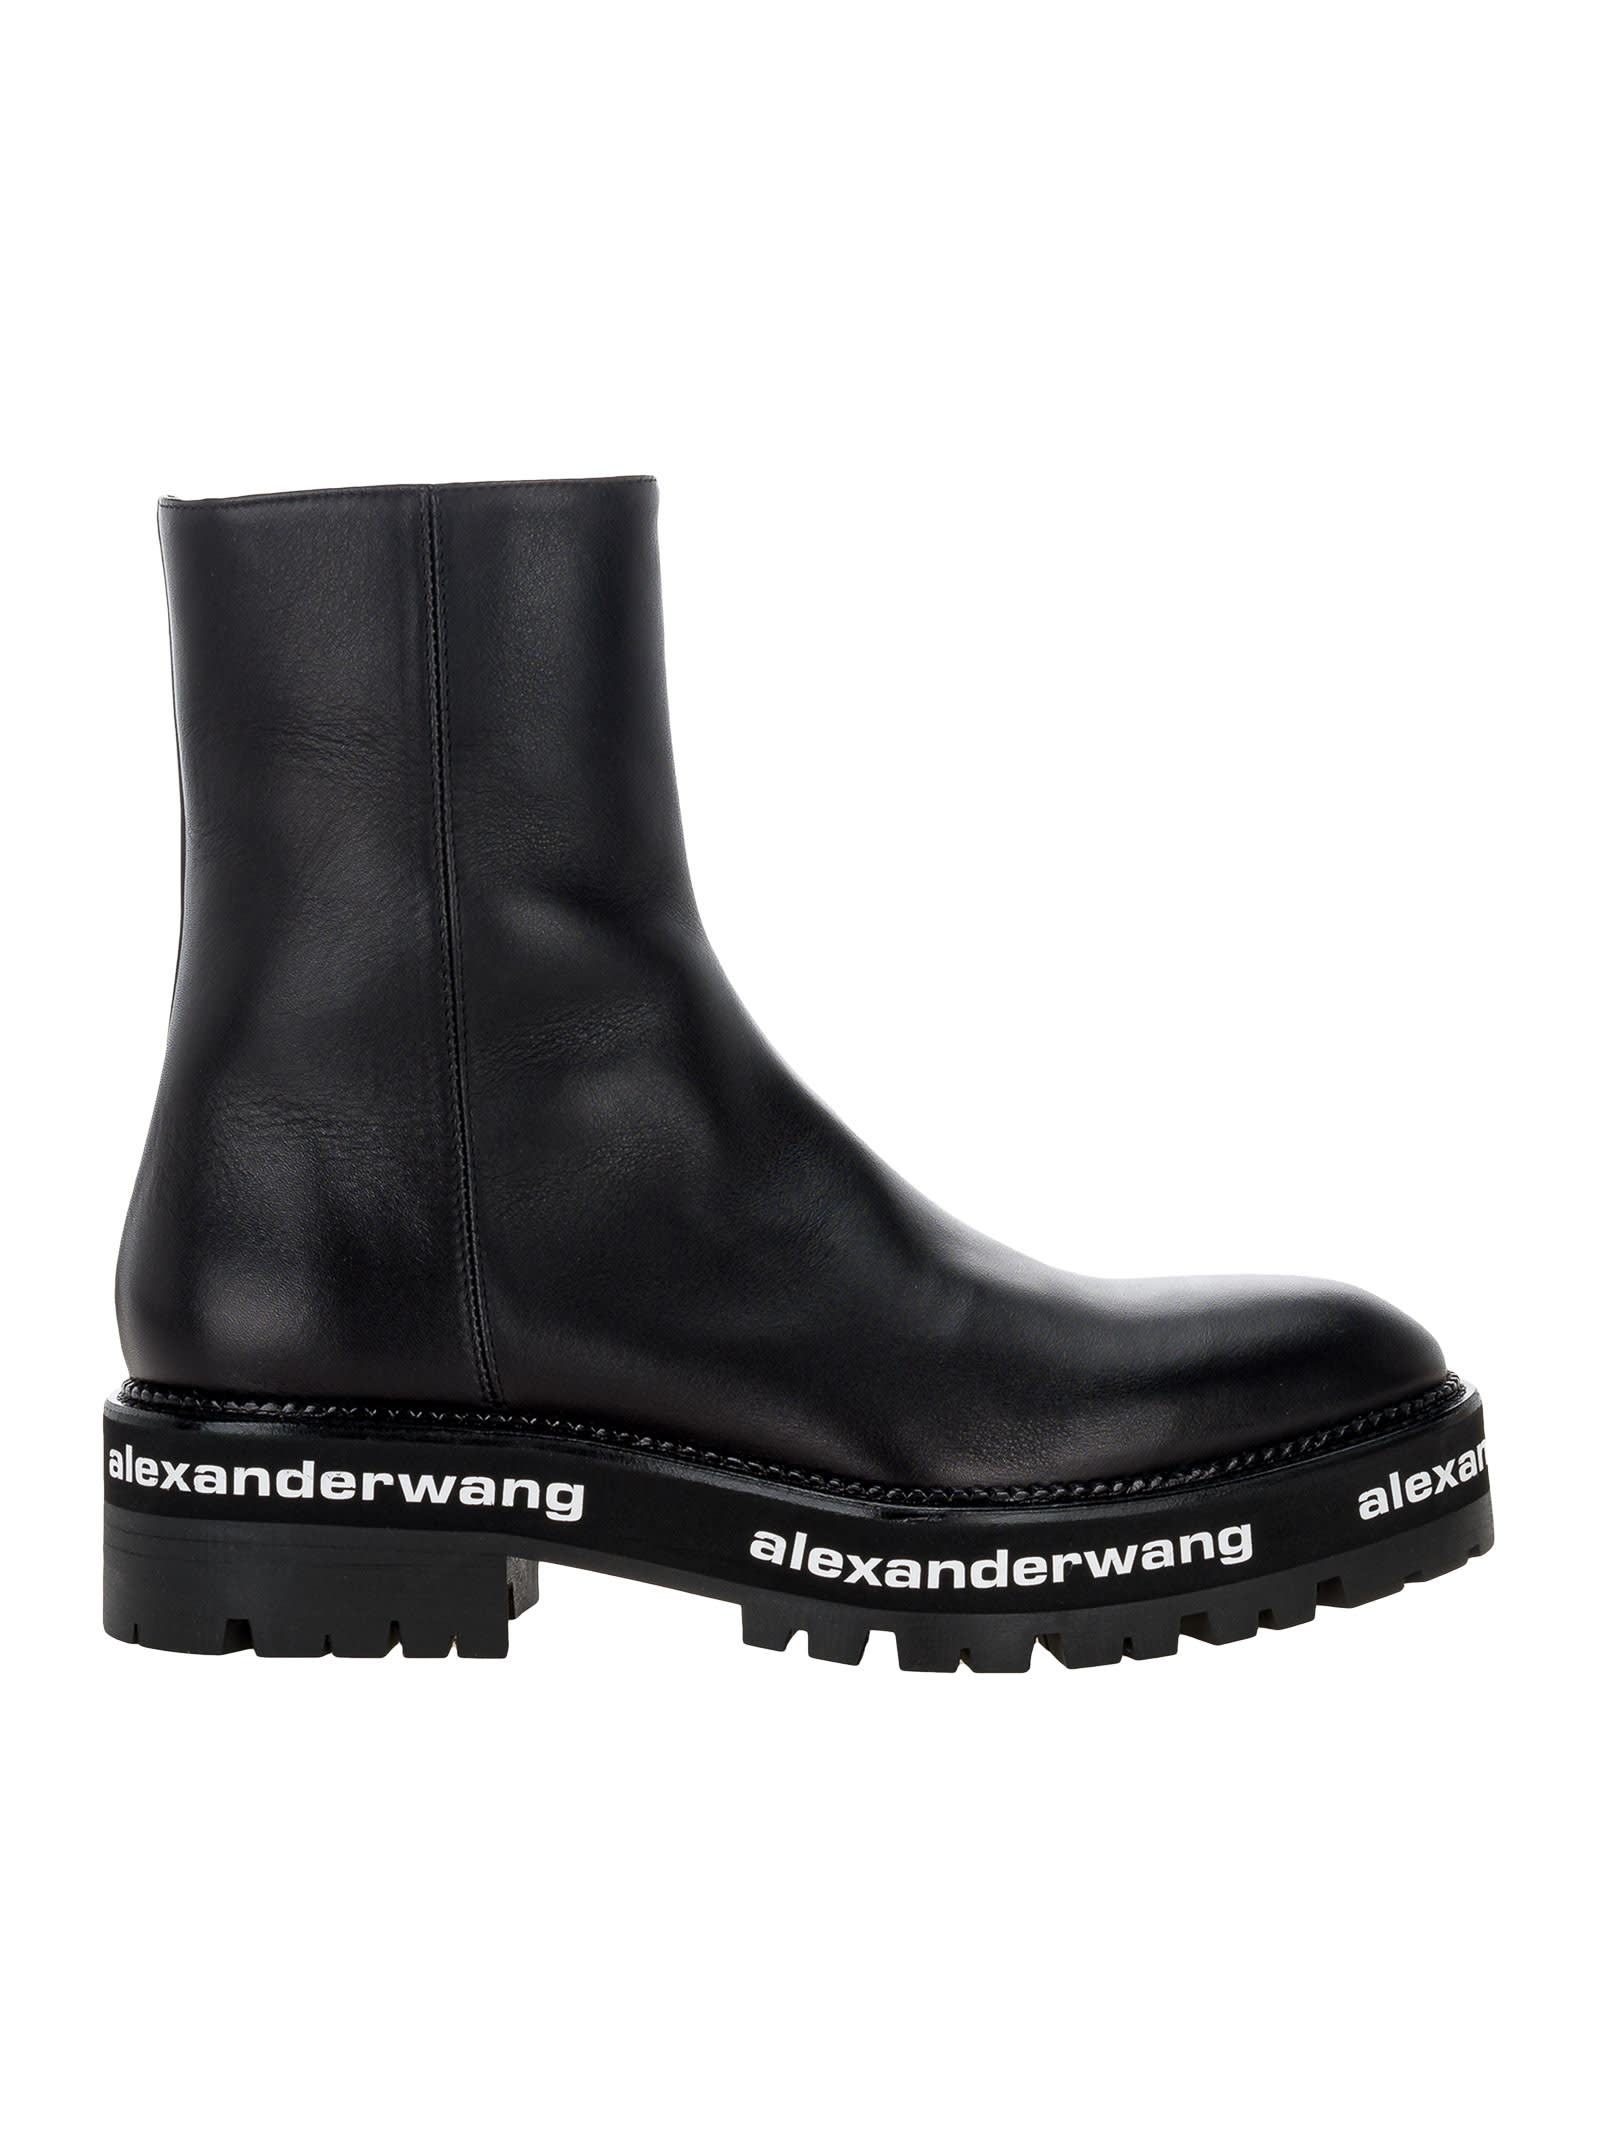 Buy Alexander Wang Sanford Boots online, shop Alexander Wang shoes with free shipping